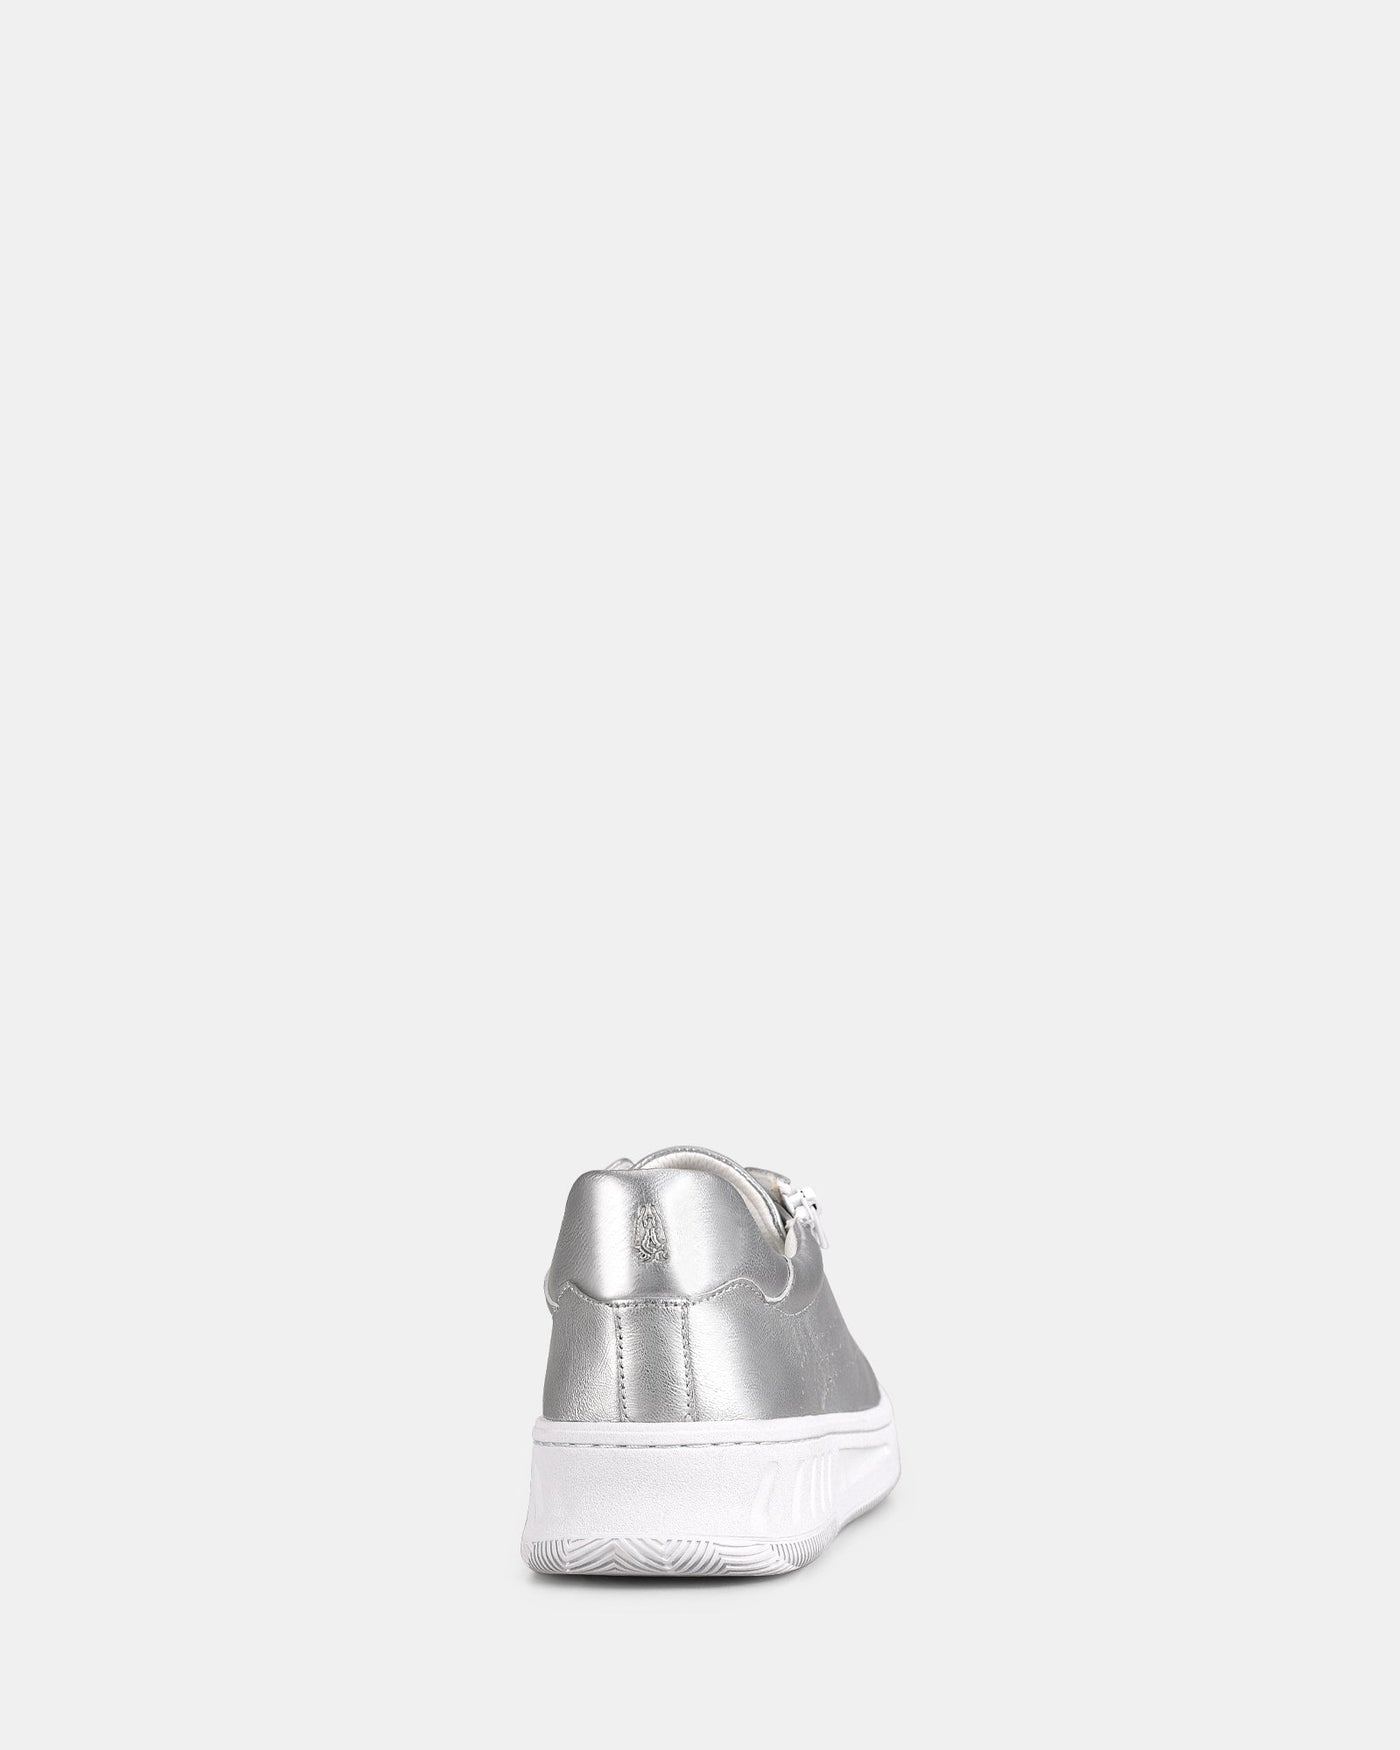 HUSH PUPPIES SPIN SILVER - Women sneakers - Collective Shoes 